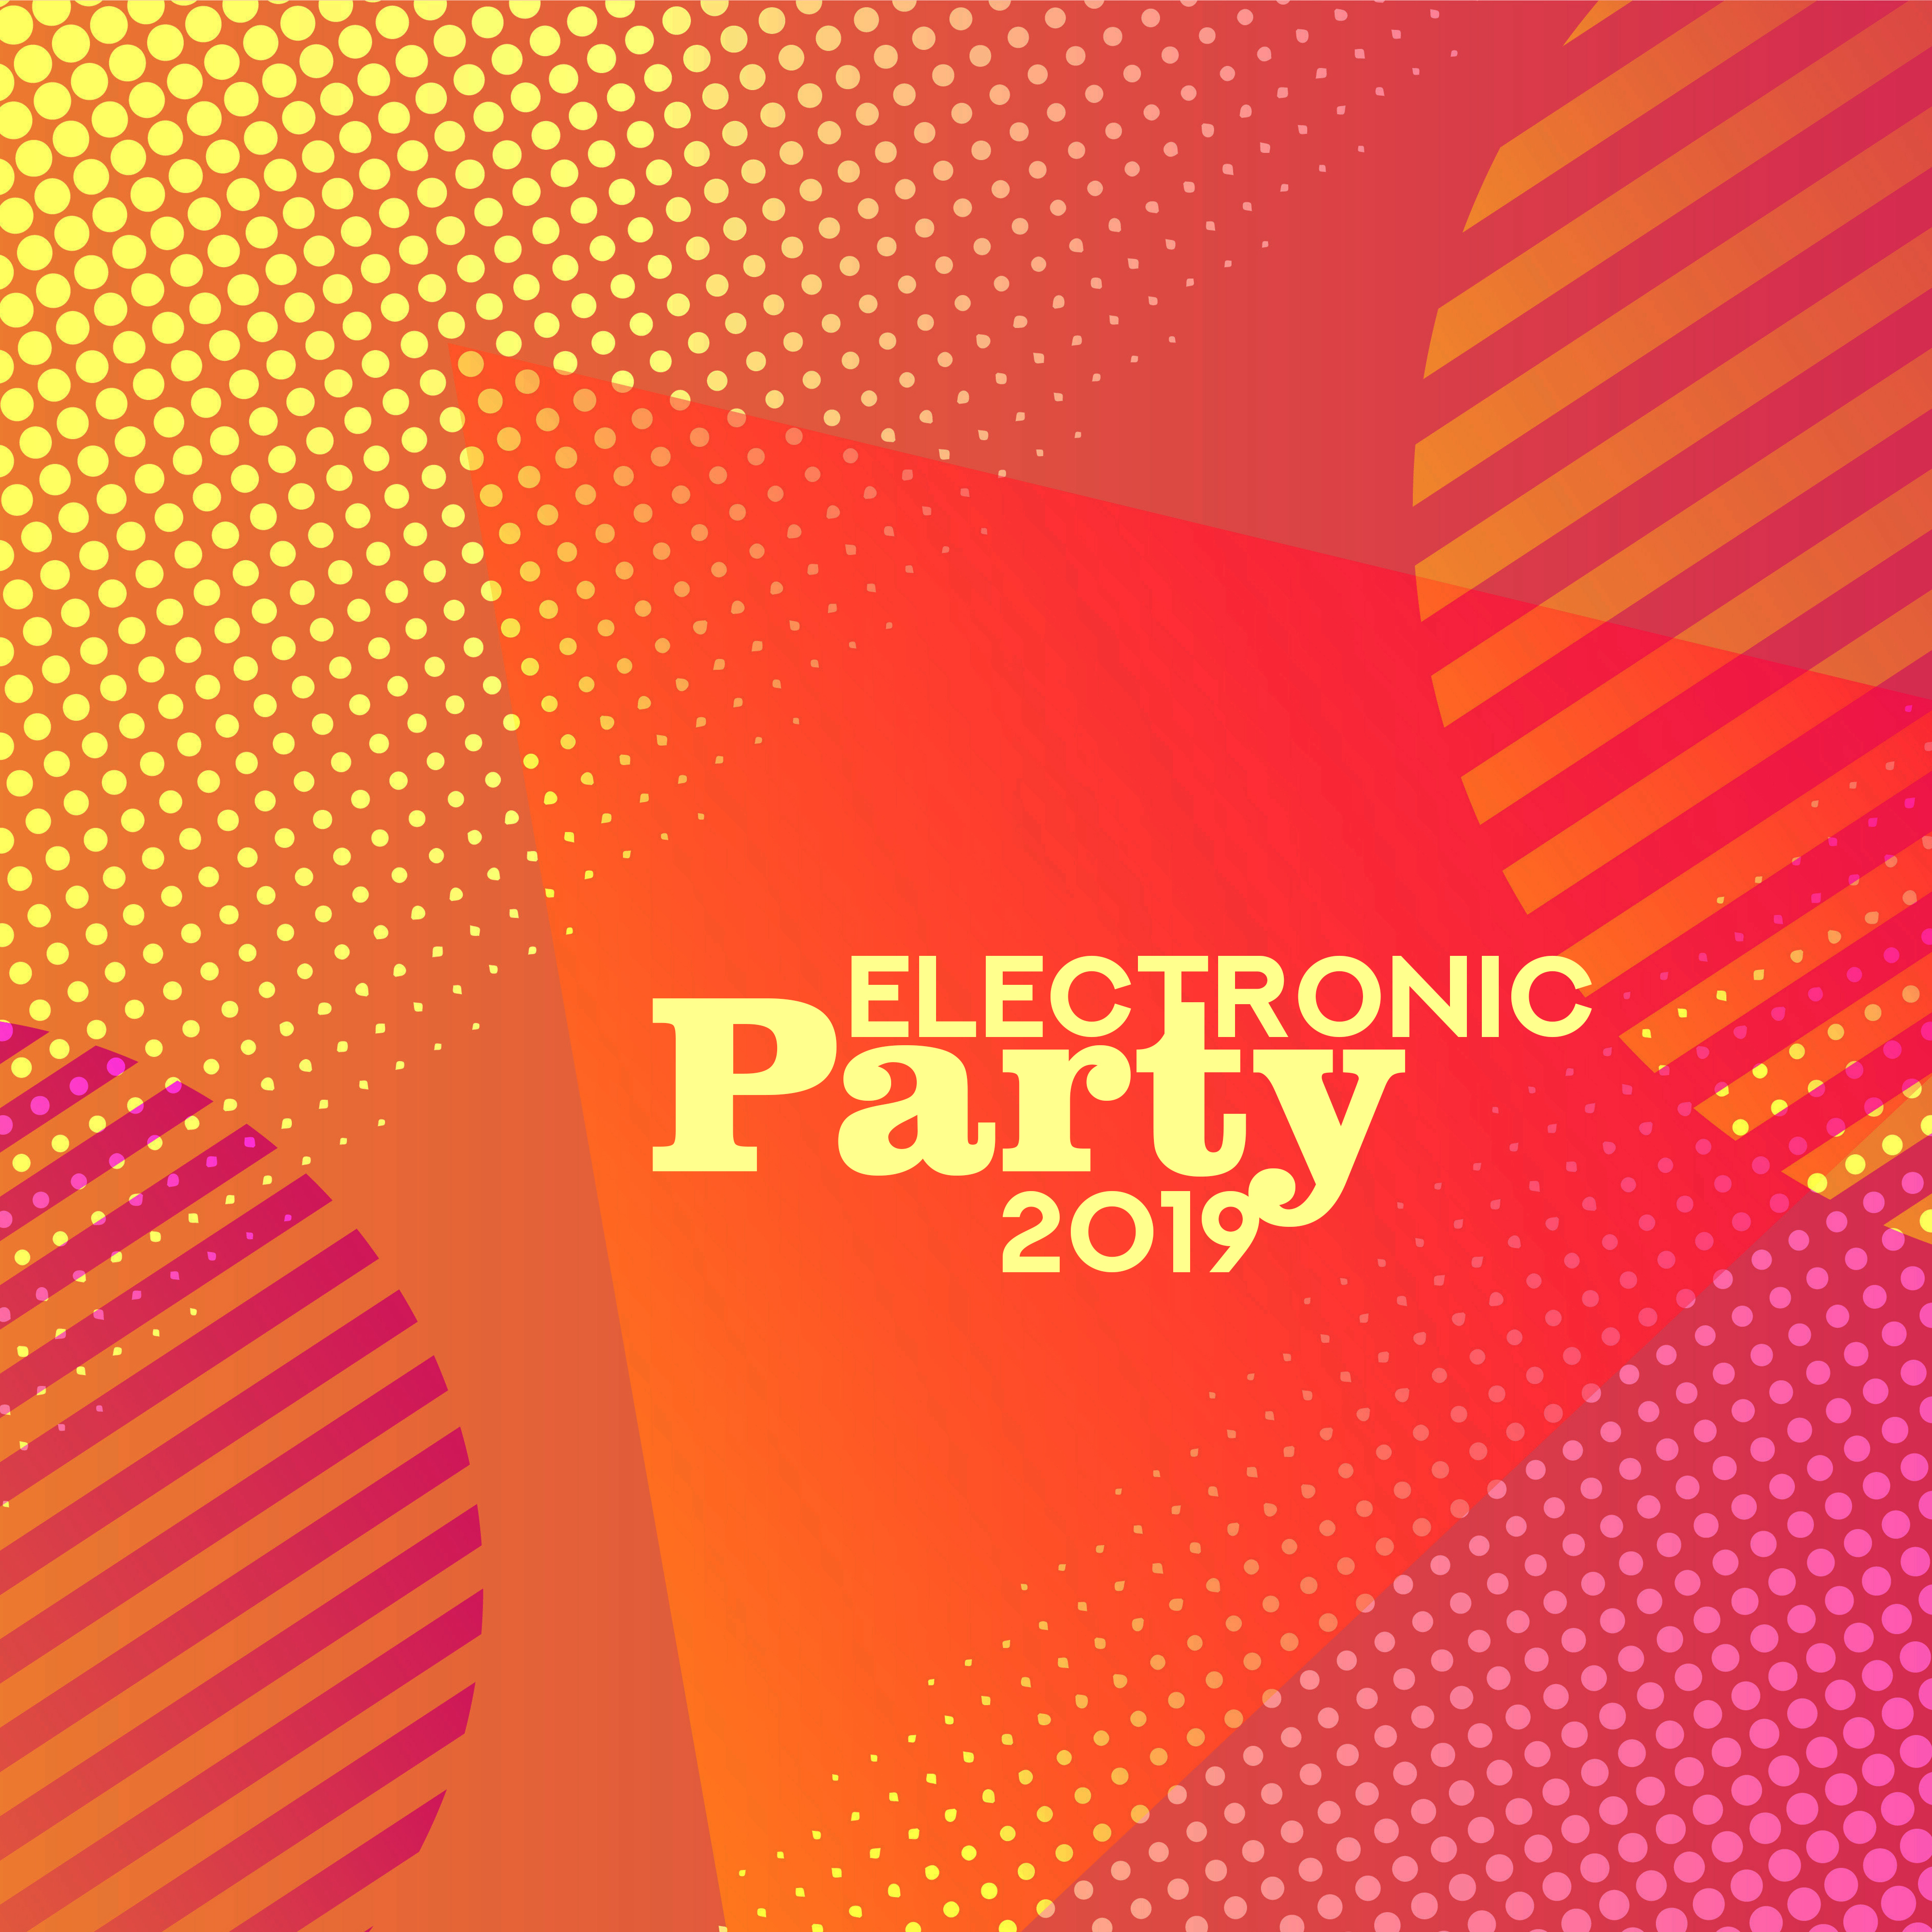 Electronic Party 2019